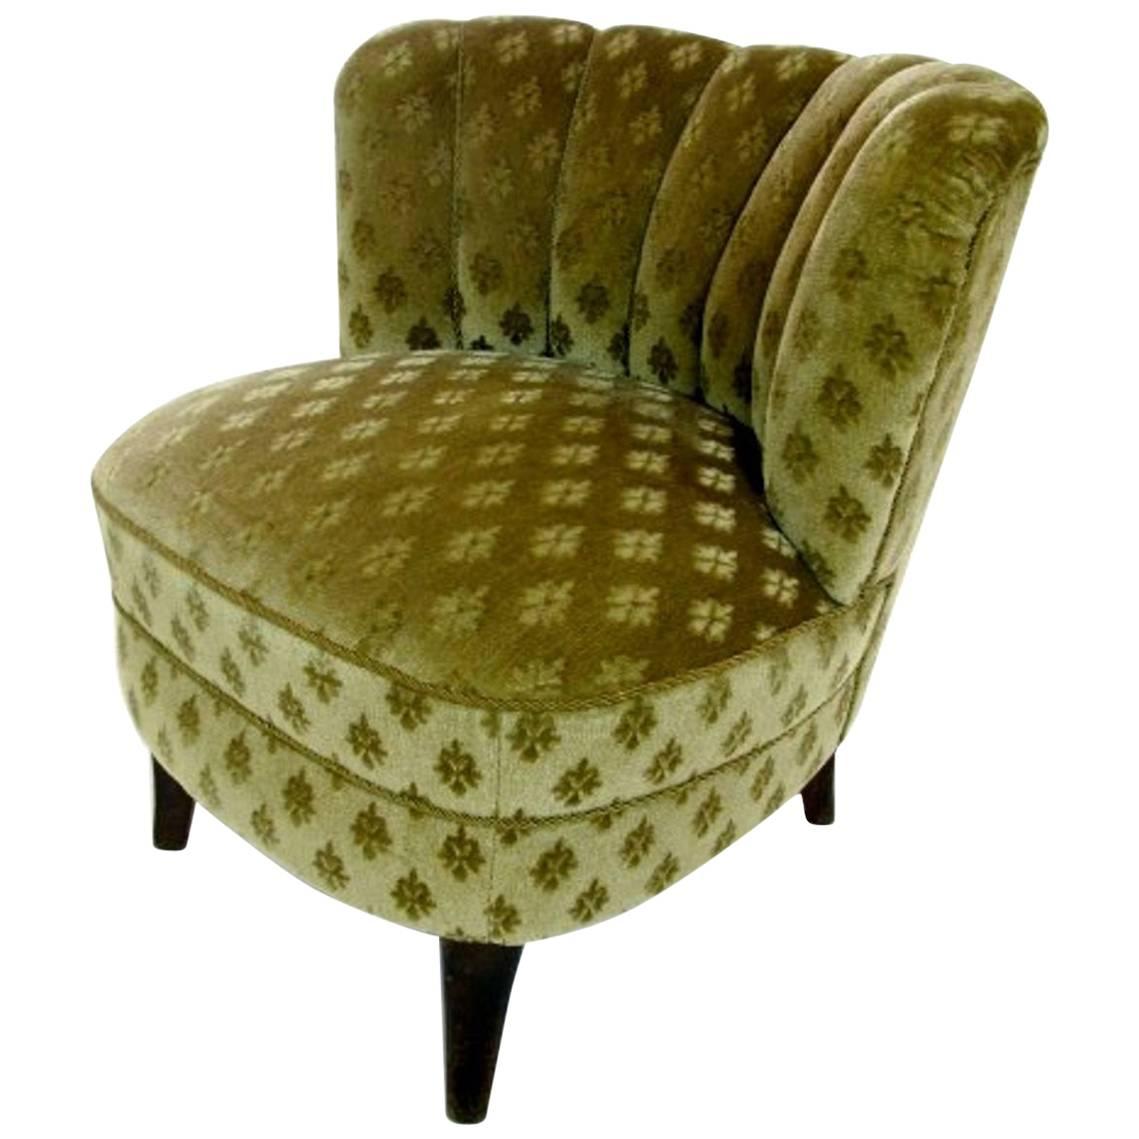 Beautiful Fan Backed Swedish Upholstered Lounge Chair, 1940s For Sale